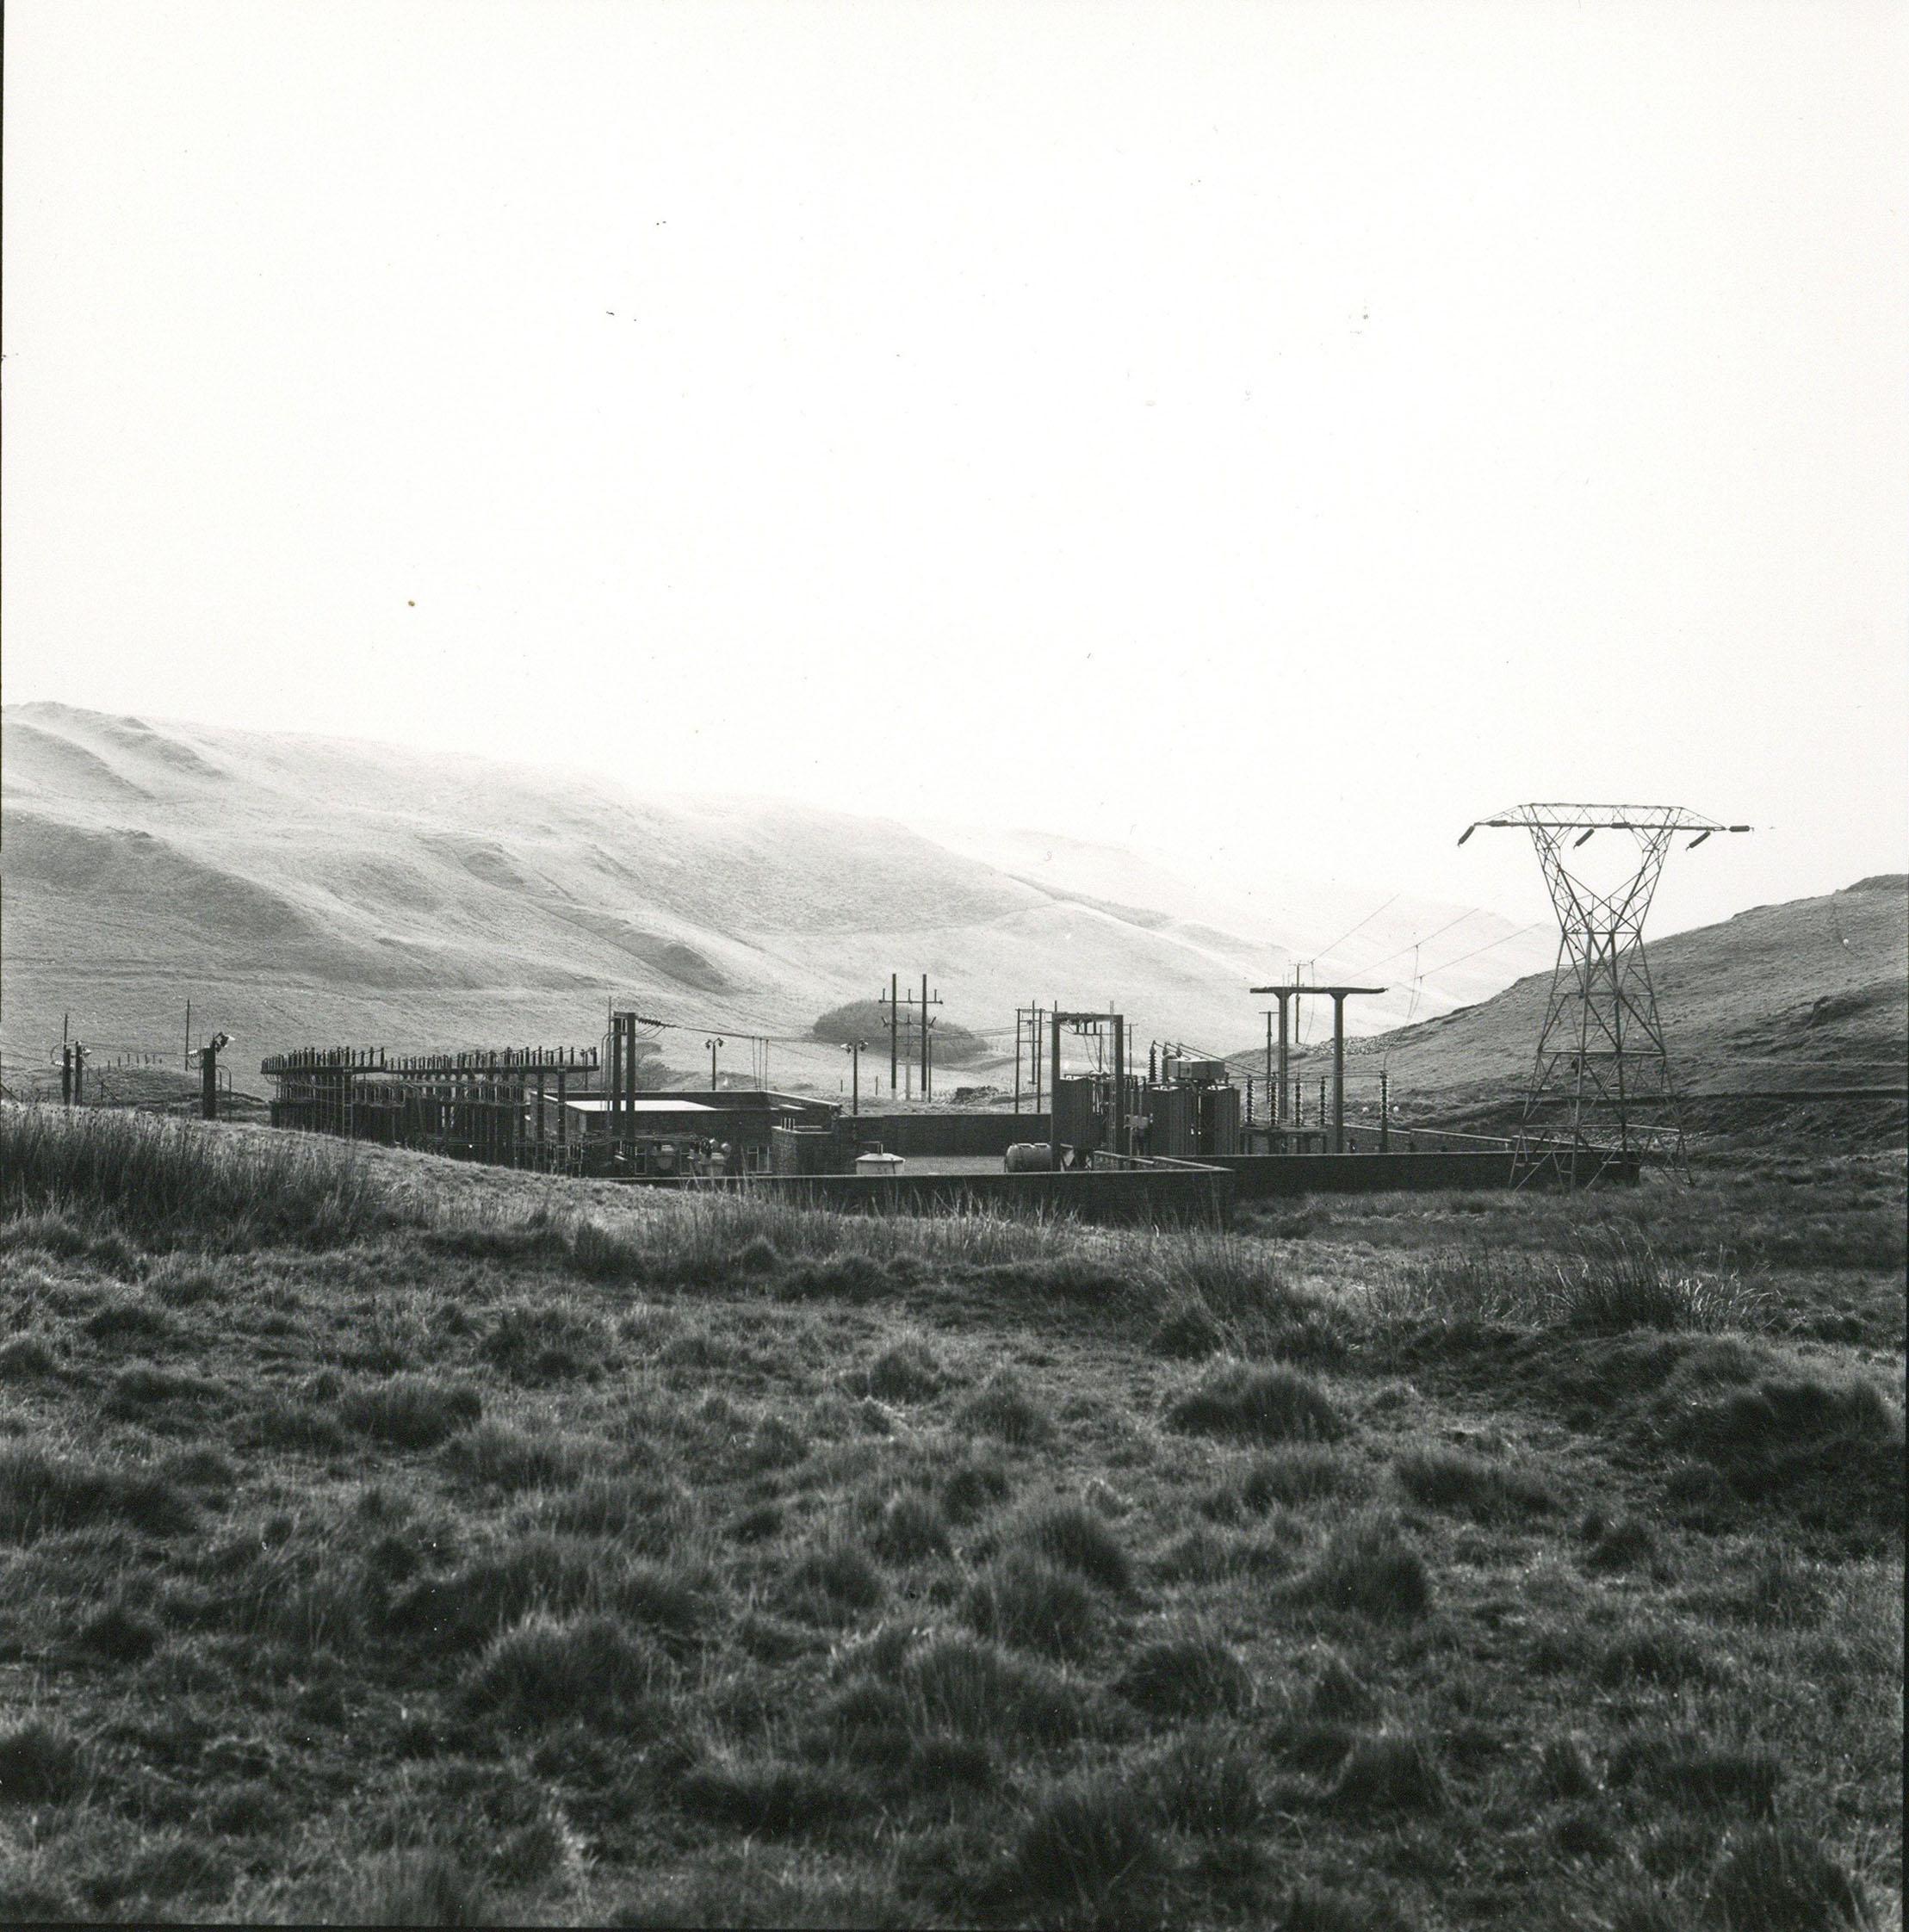 One from a series of photographs we have listed, to see the others scroll down to 'More from this seller' and click on 'View all from seller' and then search.

Rosemary Ellis
Power Station
Original photograph for Pipes and Wires in the Outlooks and